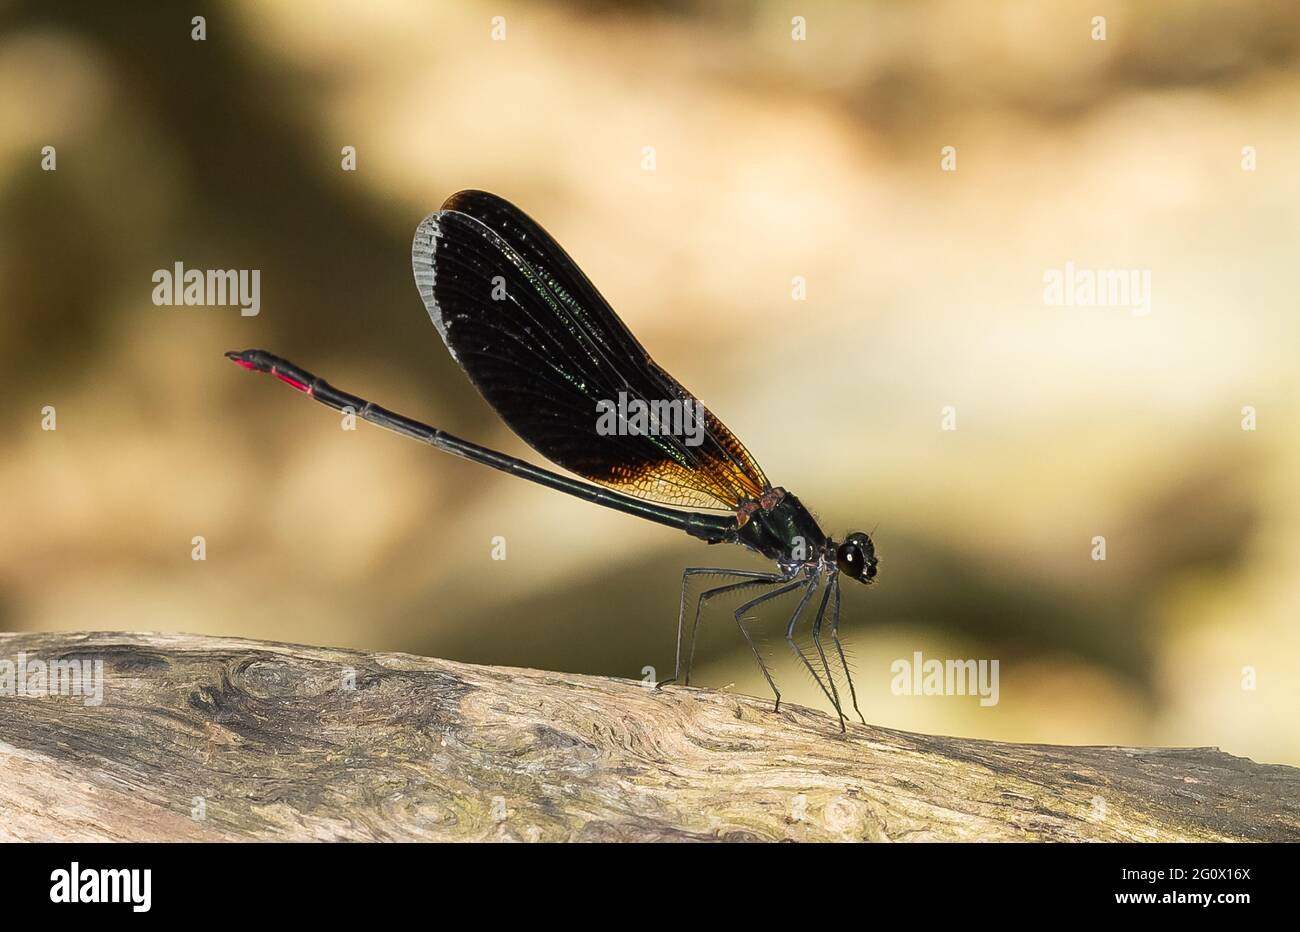 Soft focus of a damselfly with dark wings on a tree branch Stock Photo